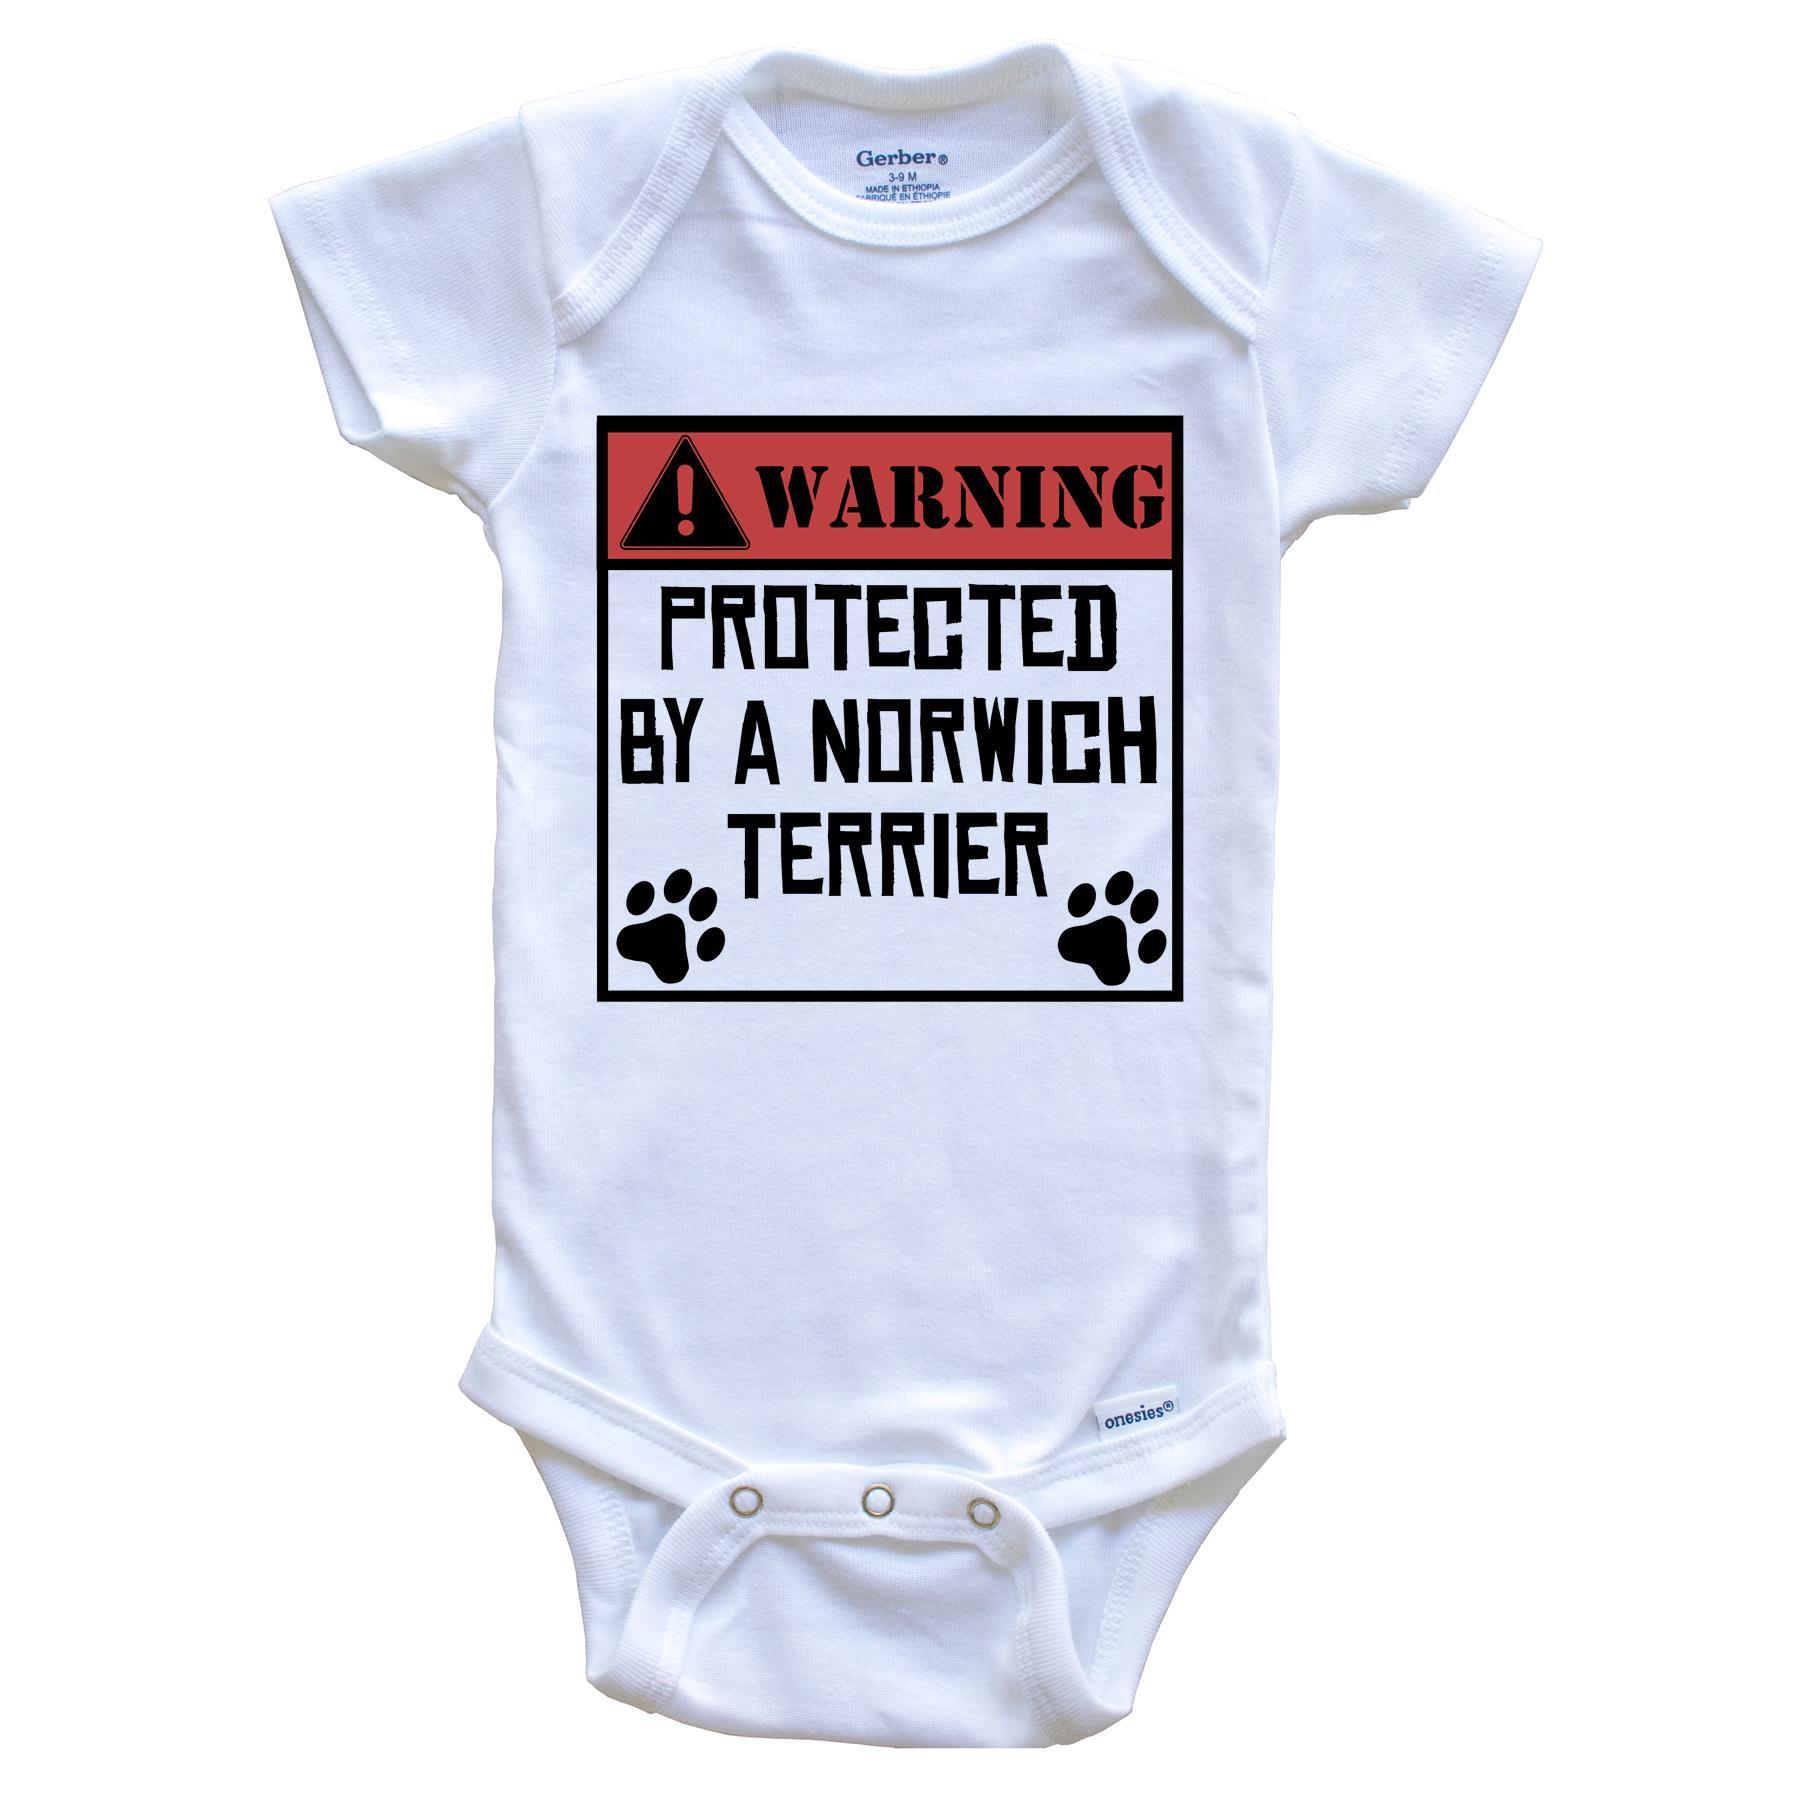 Warning Protected By A Norwich Terrier Funny Baby Onesie